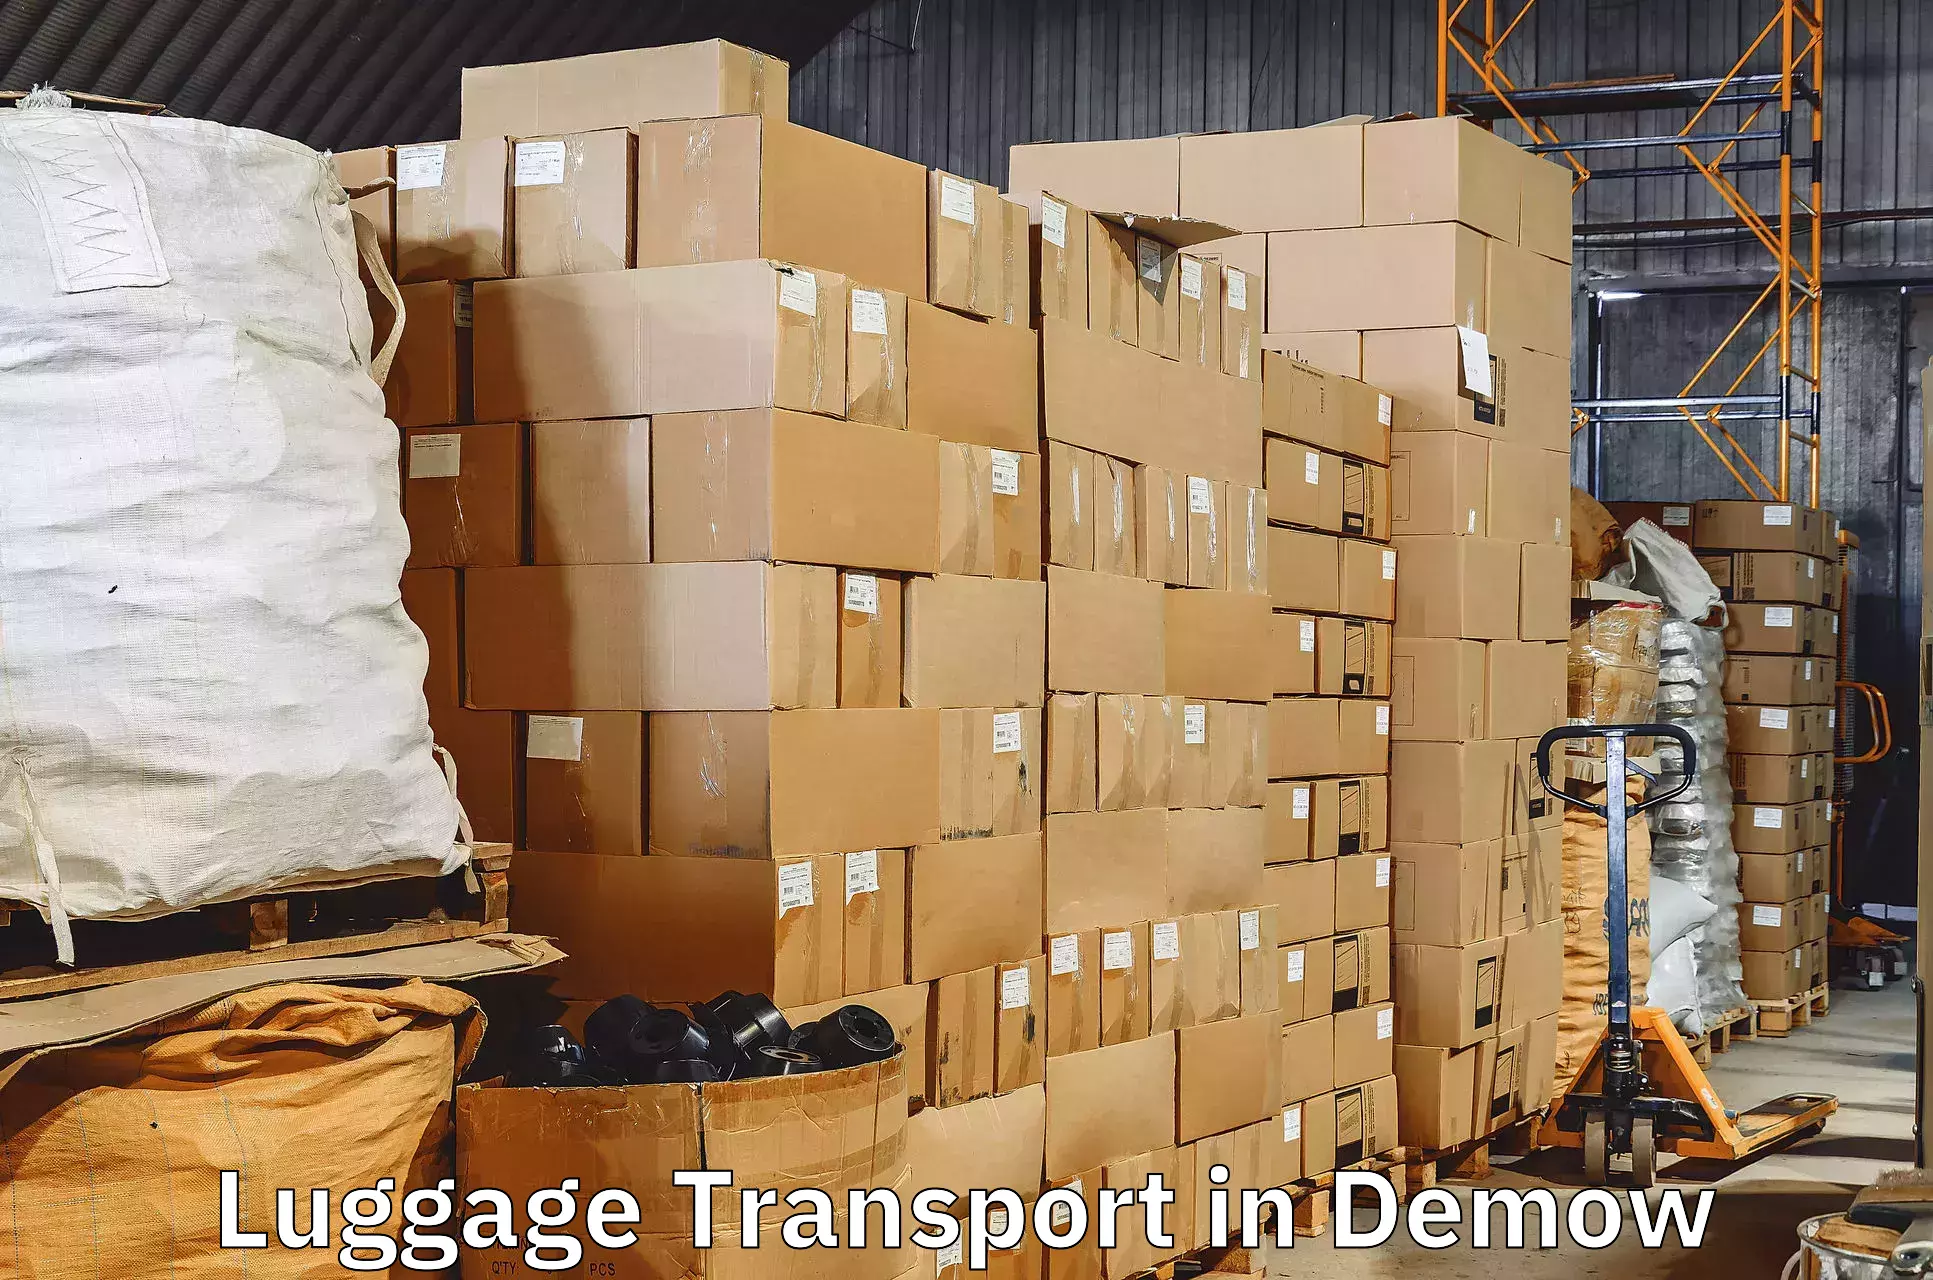 Luggage transport consultancy in Demow